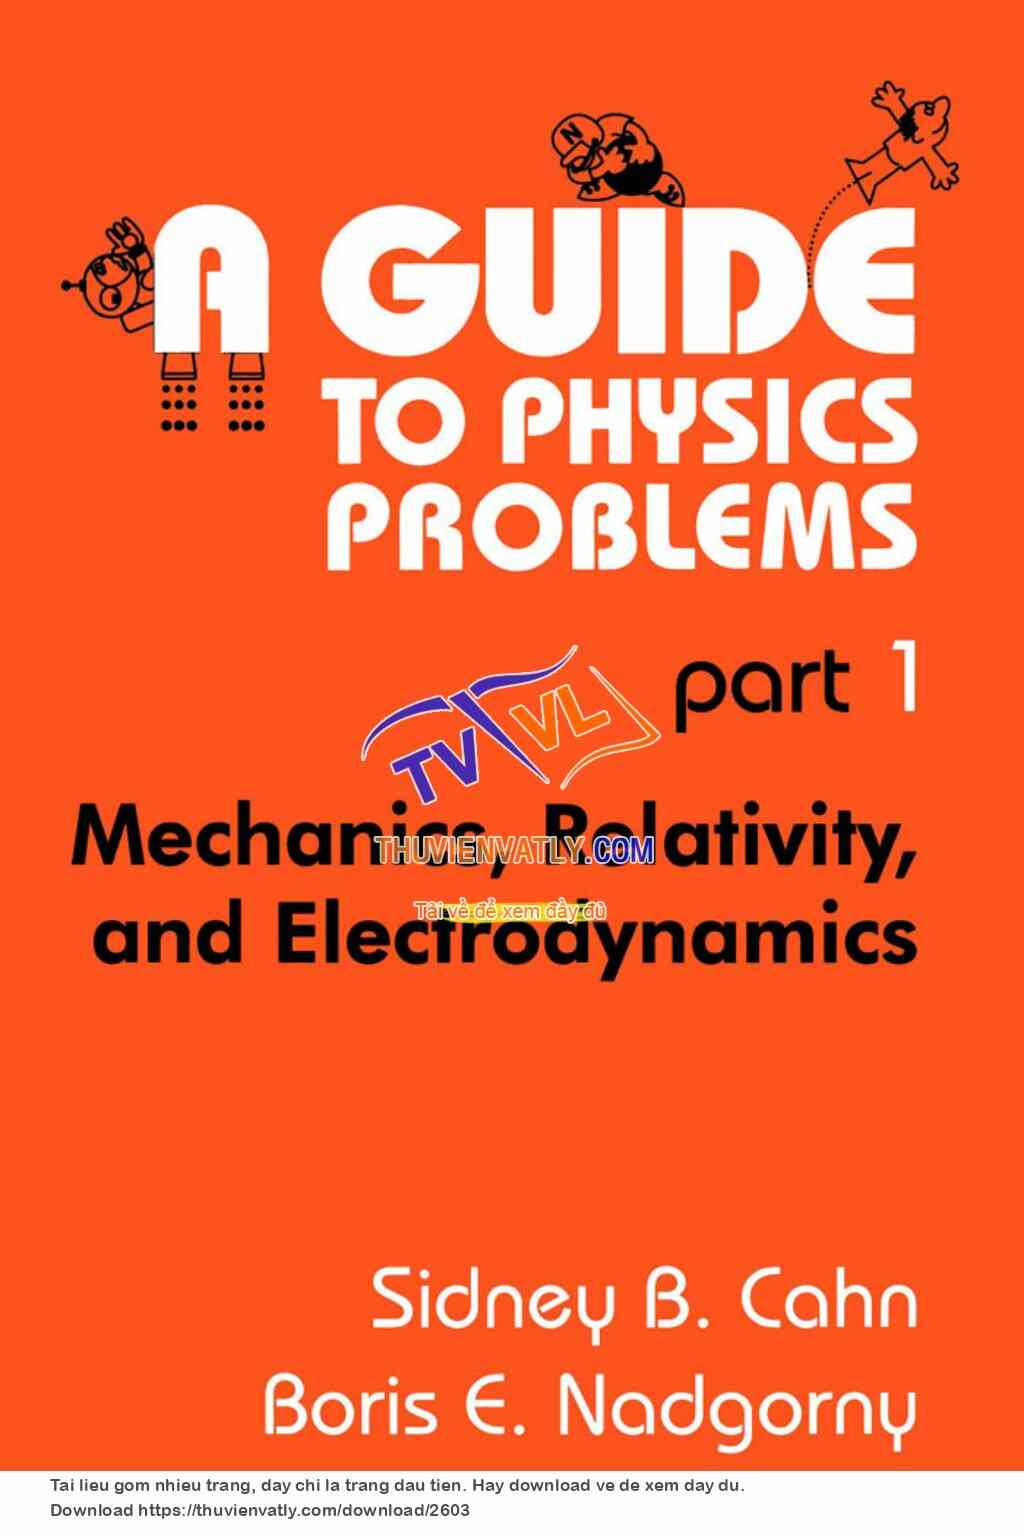 A Guide to Physics Problems Part 1 - Mechanics, Relativity, And Electrodynamics - Cahn S., Nadgorny